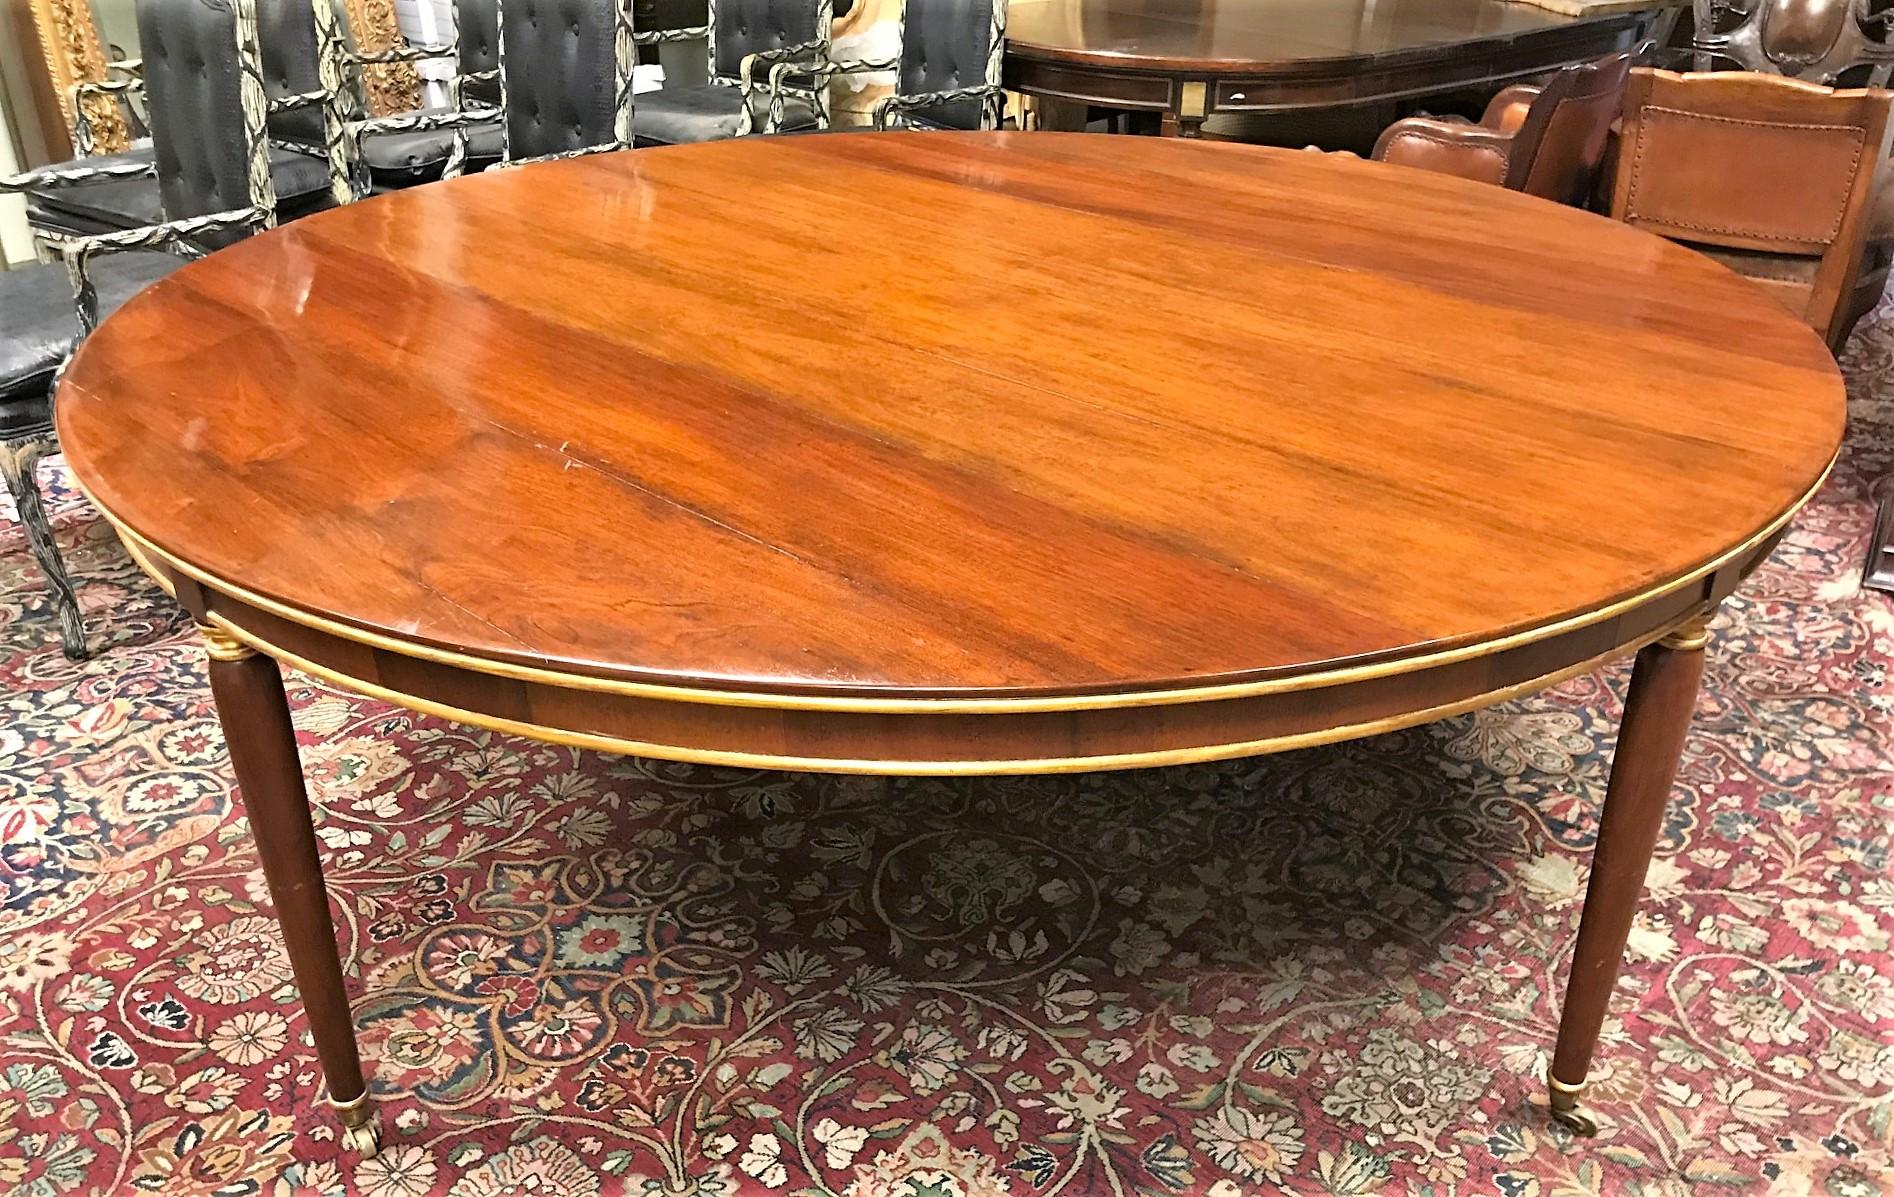 Stained Louis XVI Style Mahogany Conference Table, By Dessin Fournir